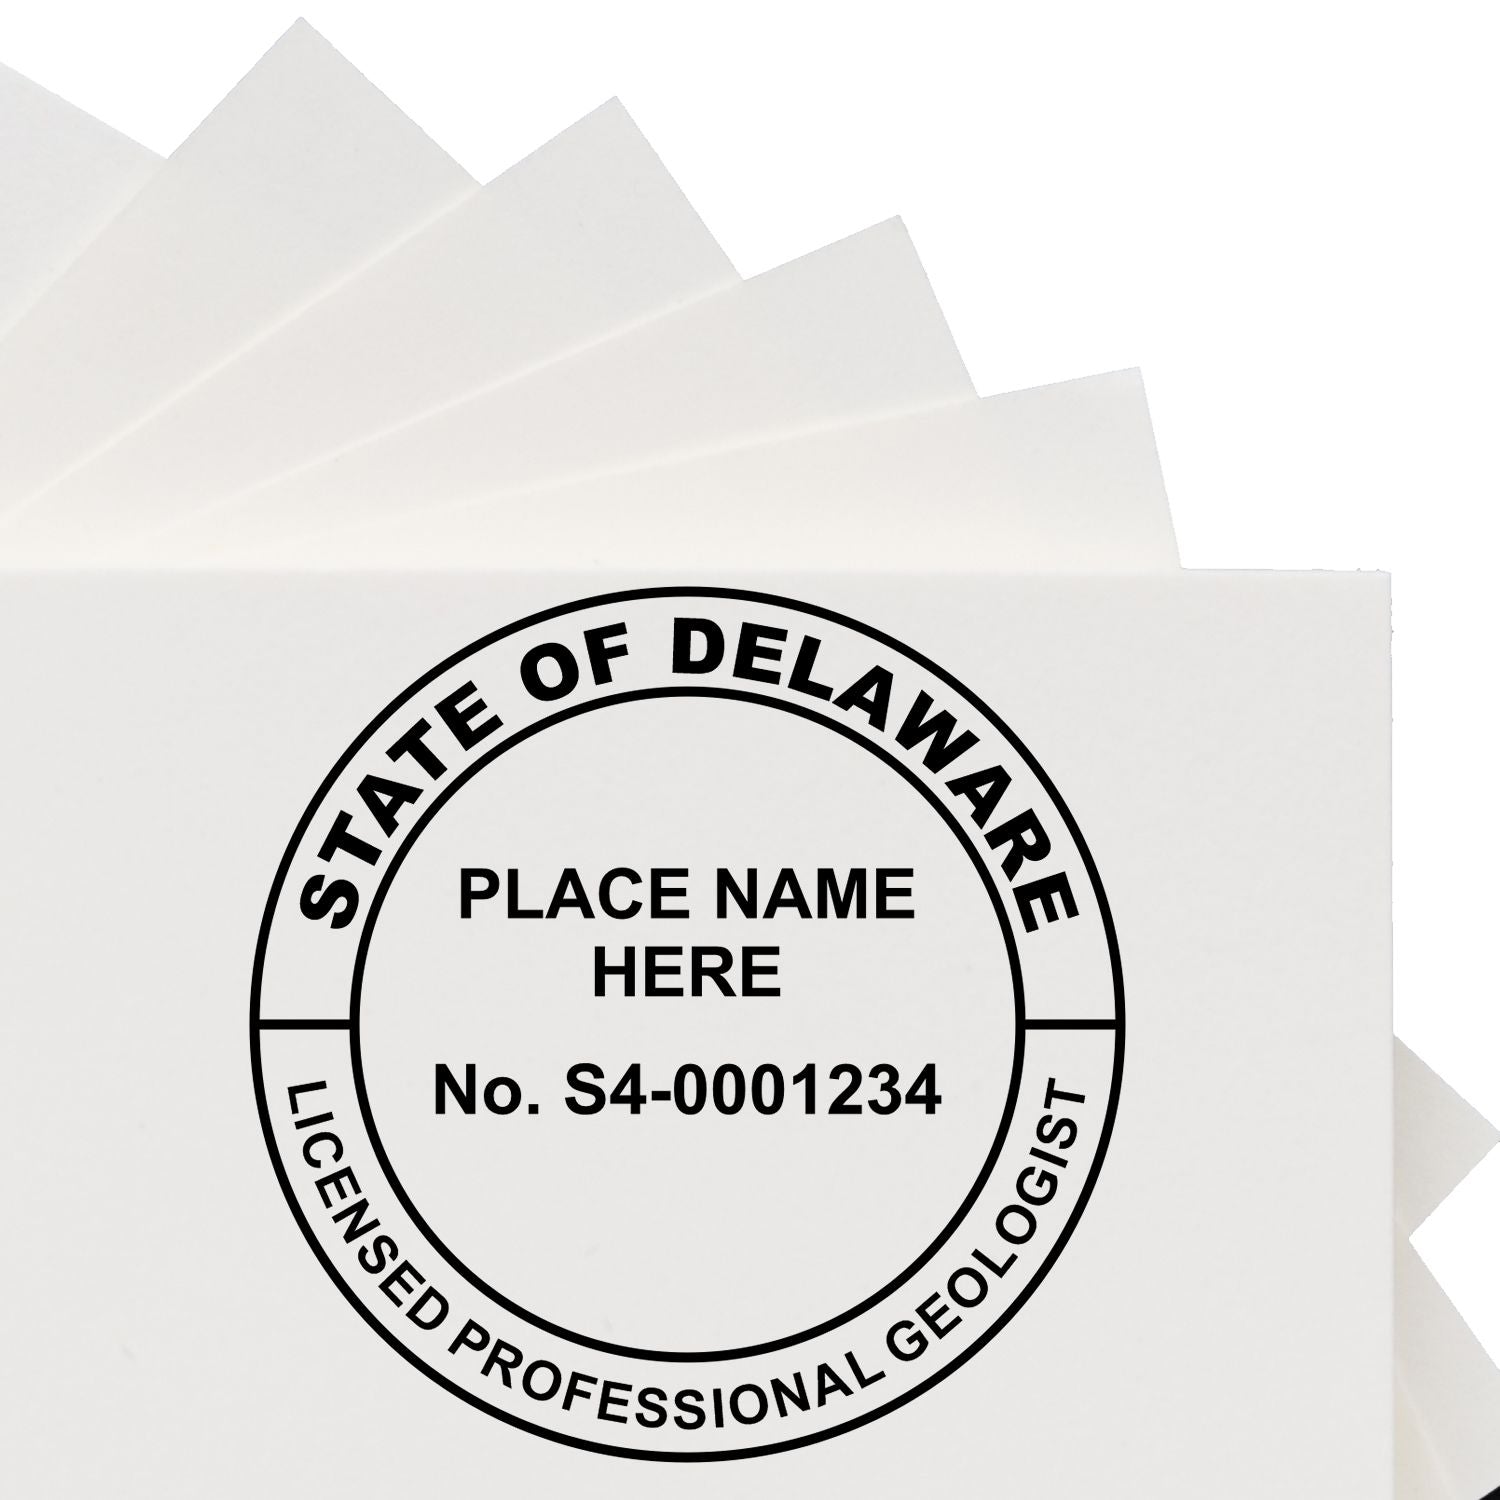 The main image for the Slim Pre-Inked Delaware Professional Geologist Seal Stamp depicting a sample of the imprint and imprint sample